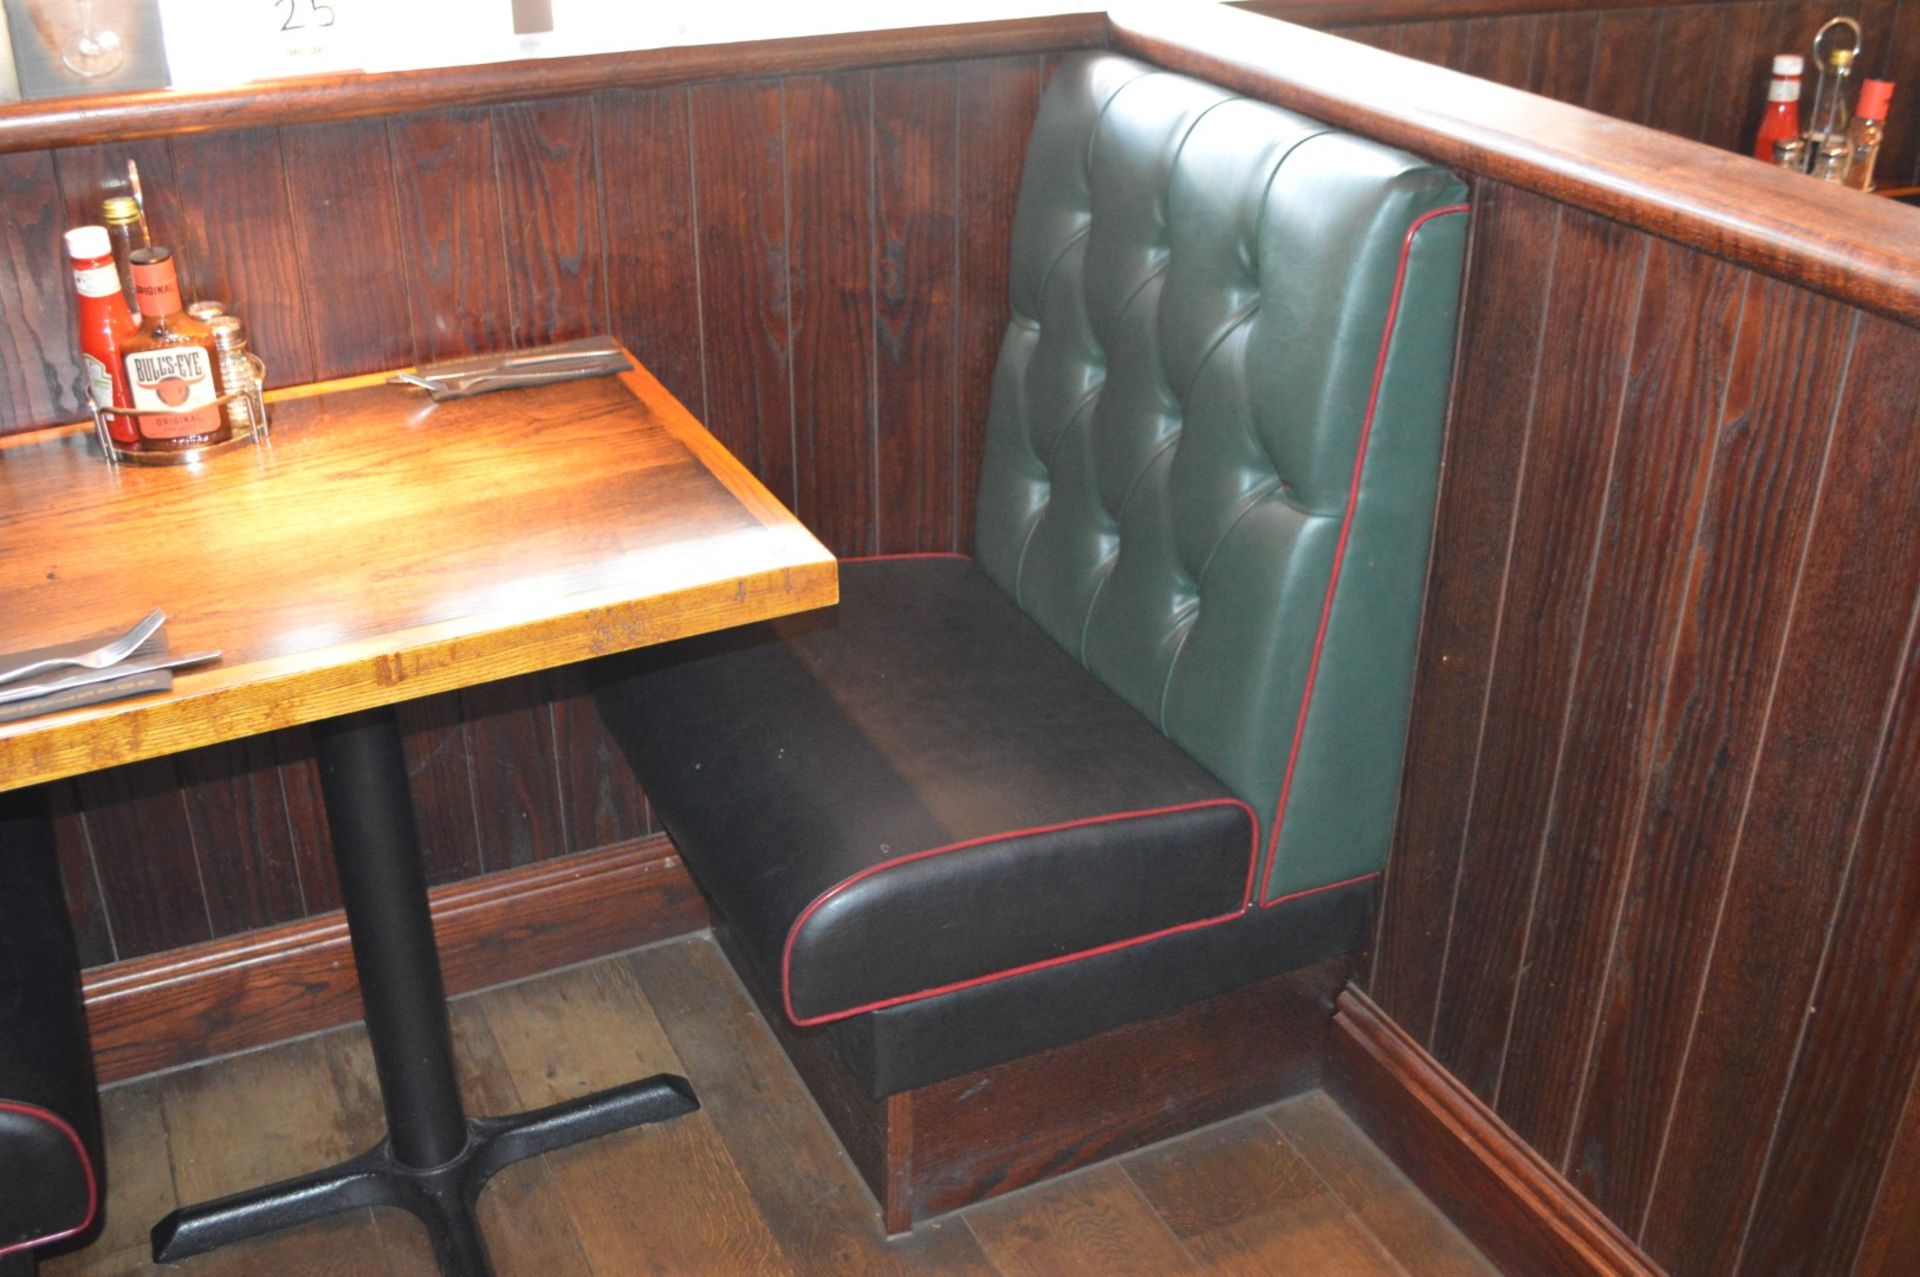 6 x Sections of Restaurant Booth Seating - Include 2 x Single Seats and 4 x Single Back to Back Seat - Image 11 of 12